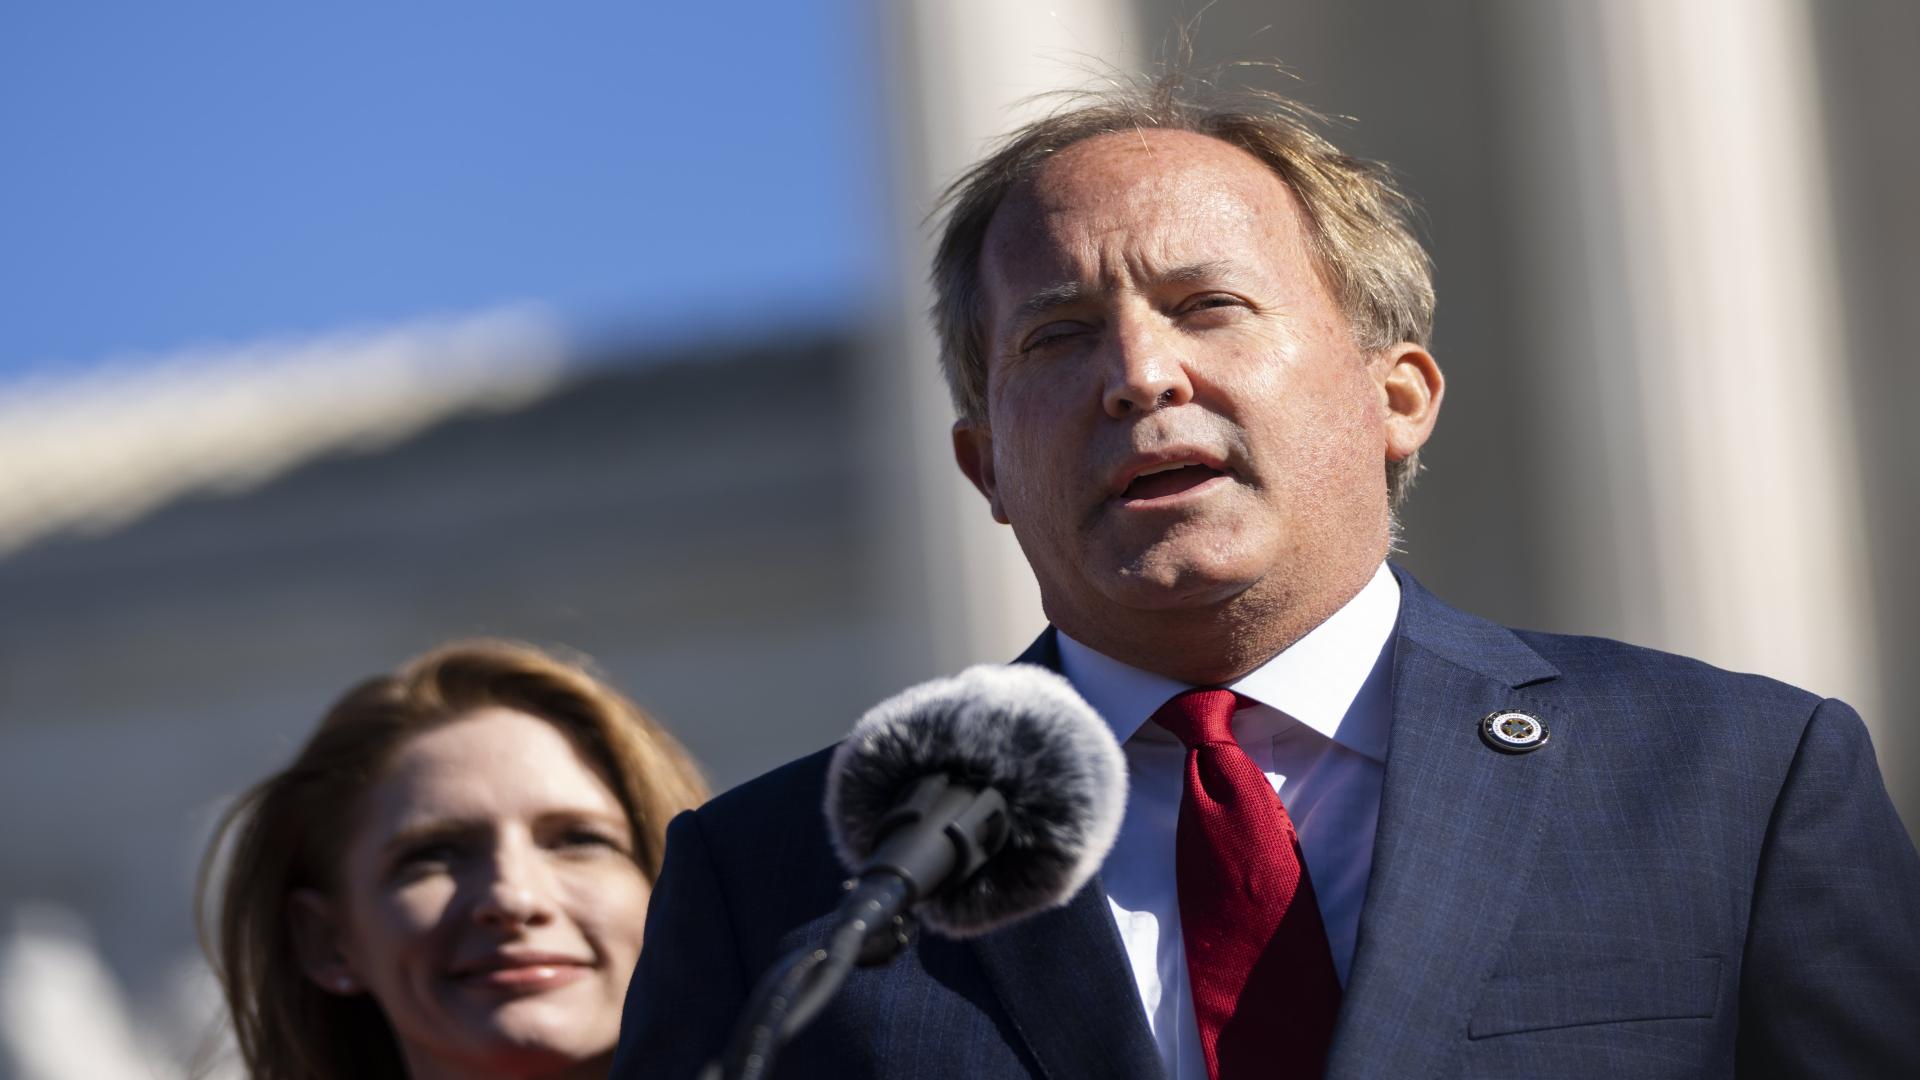 GOP Texas Attorney General Ken Paxton is acquitted of 16 impeachment charges following years of corruption allegations